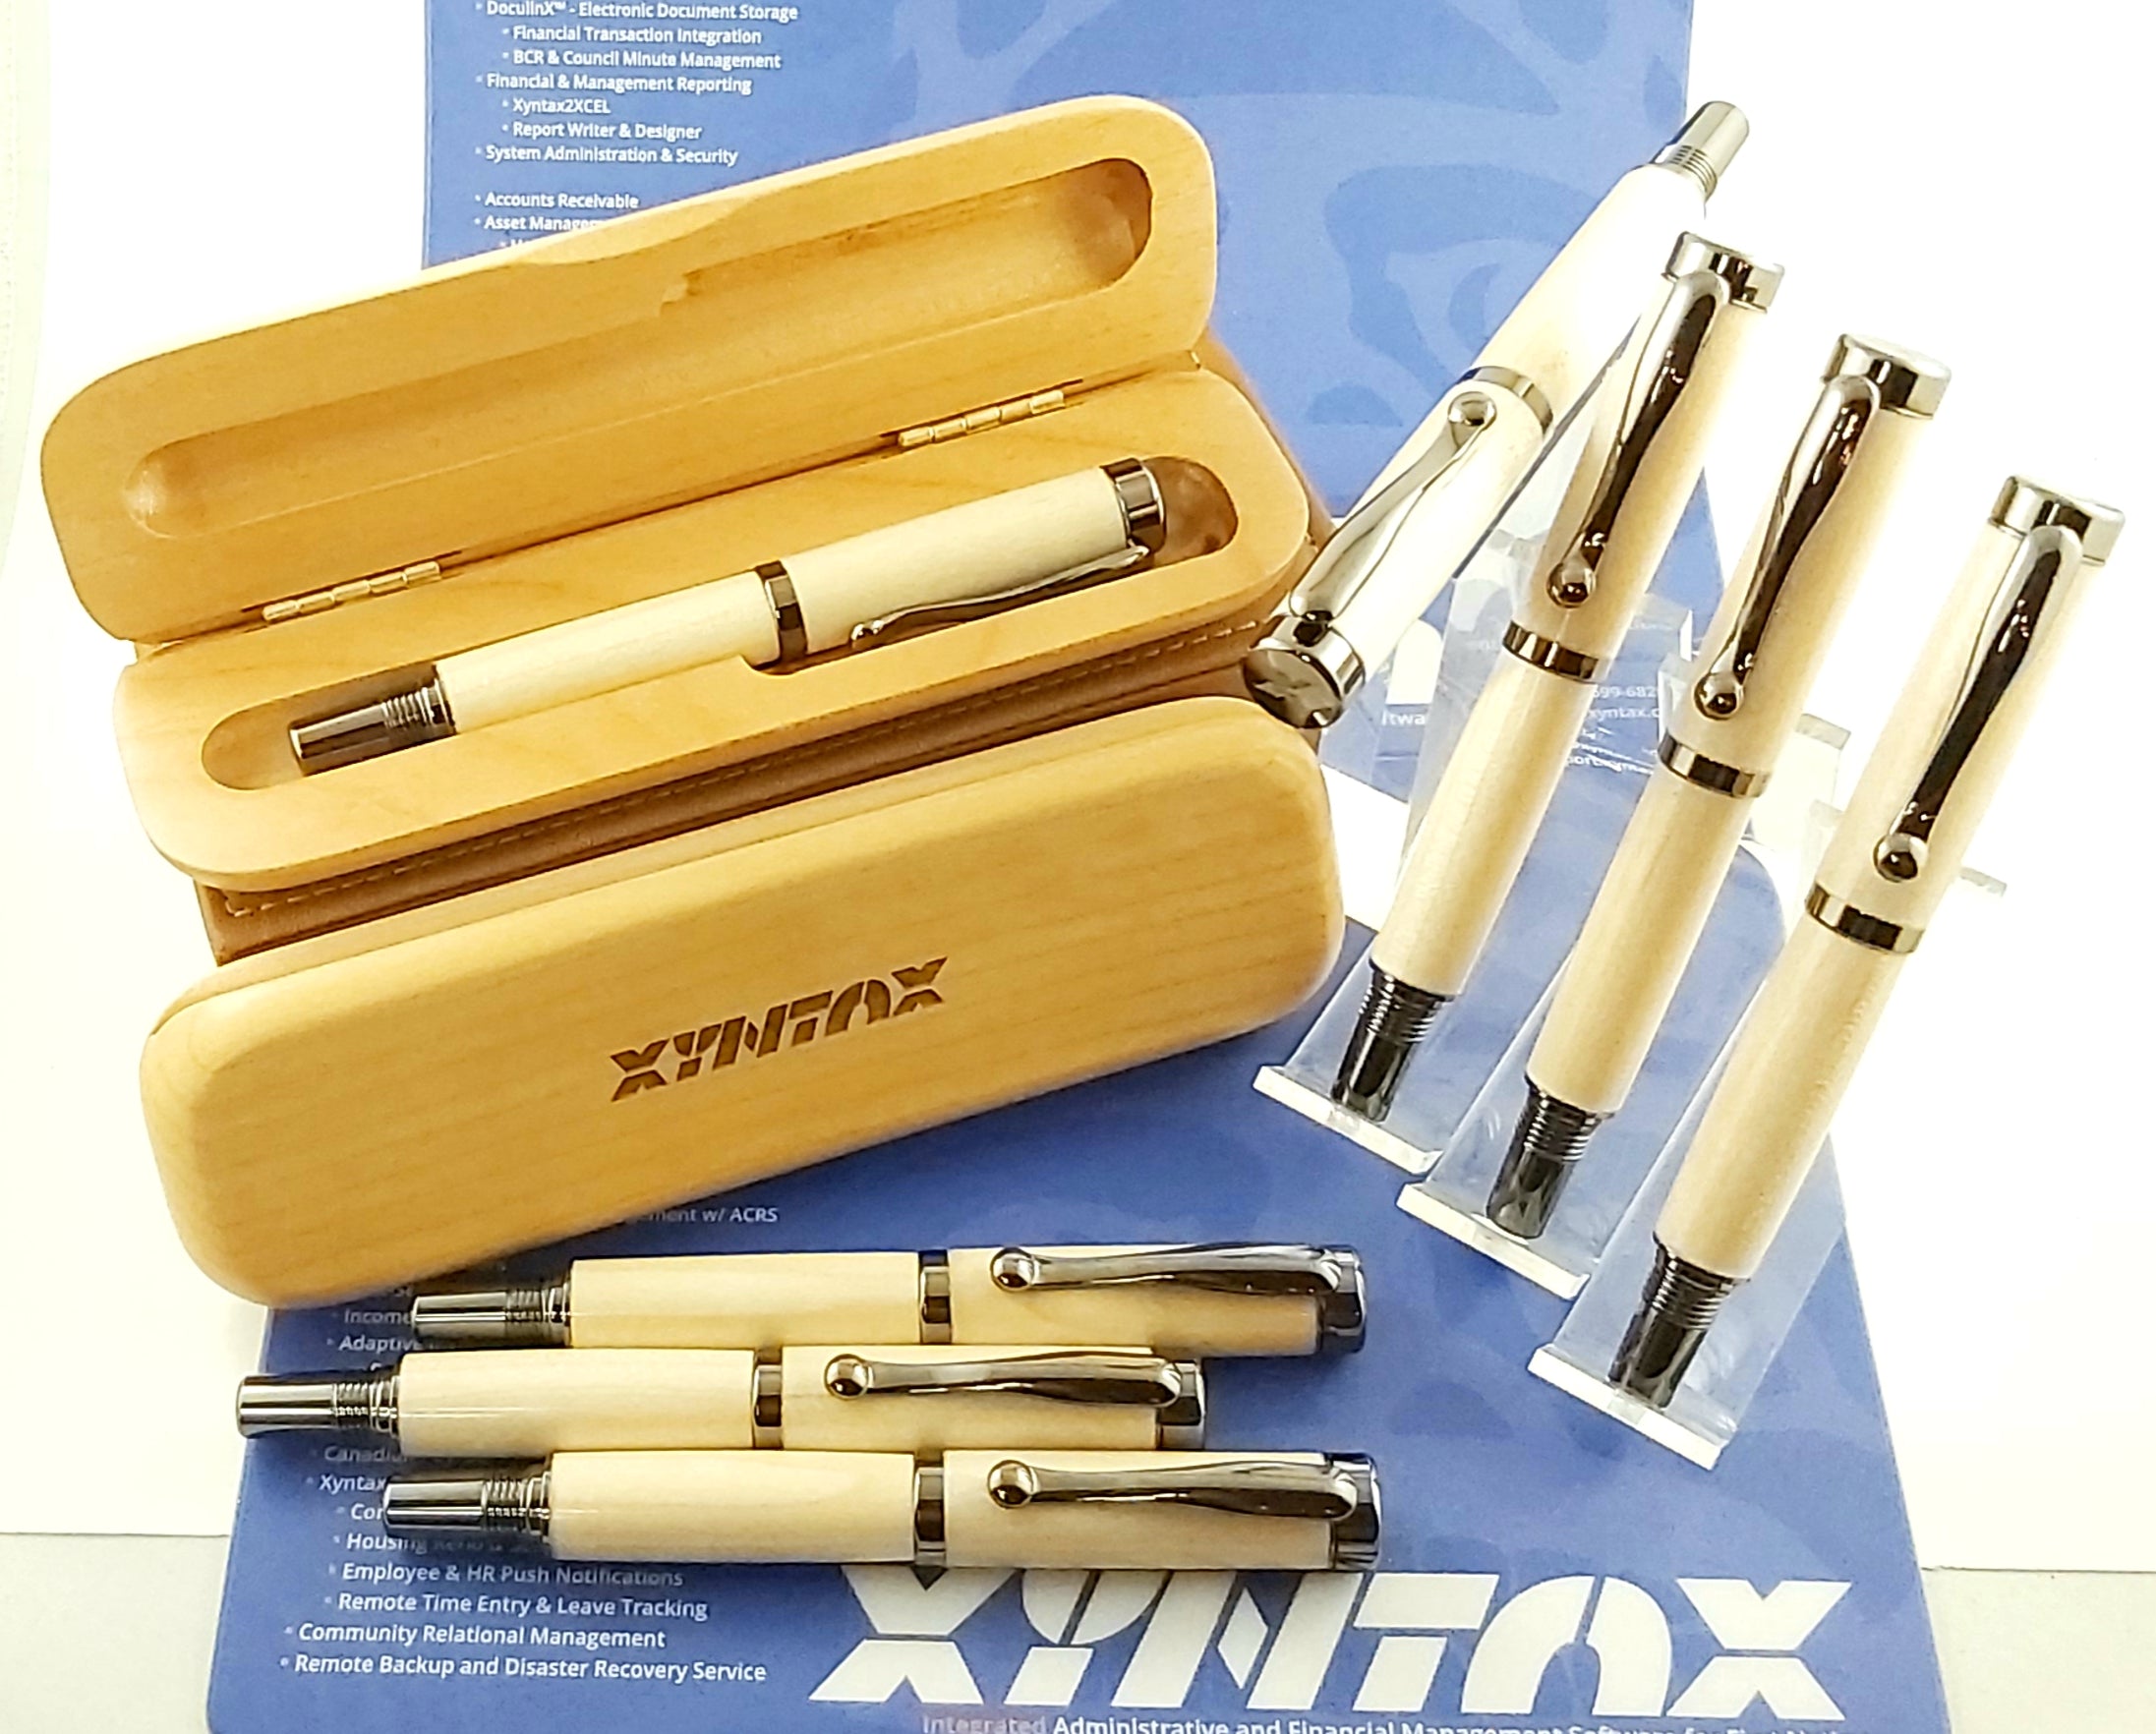 Postable Atrax rollerball with Maple Pen Box